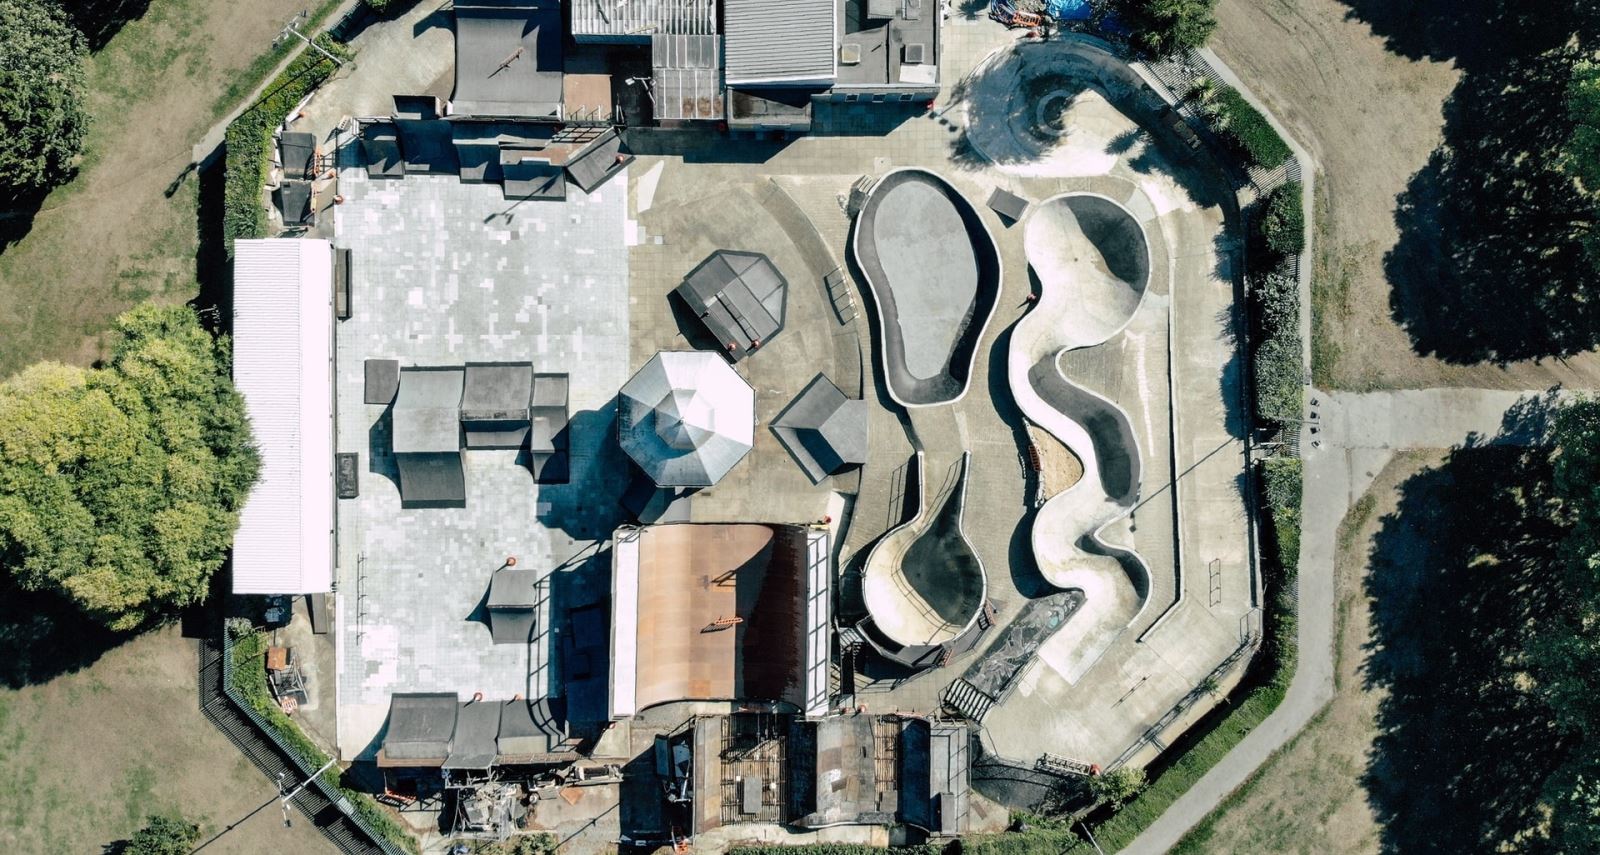 Southsea Skate Park from the air